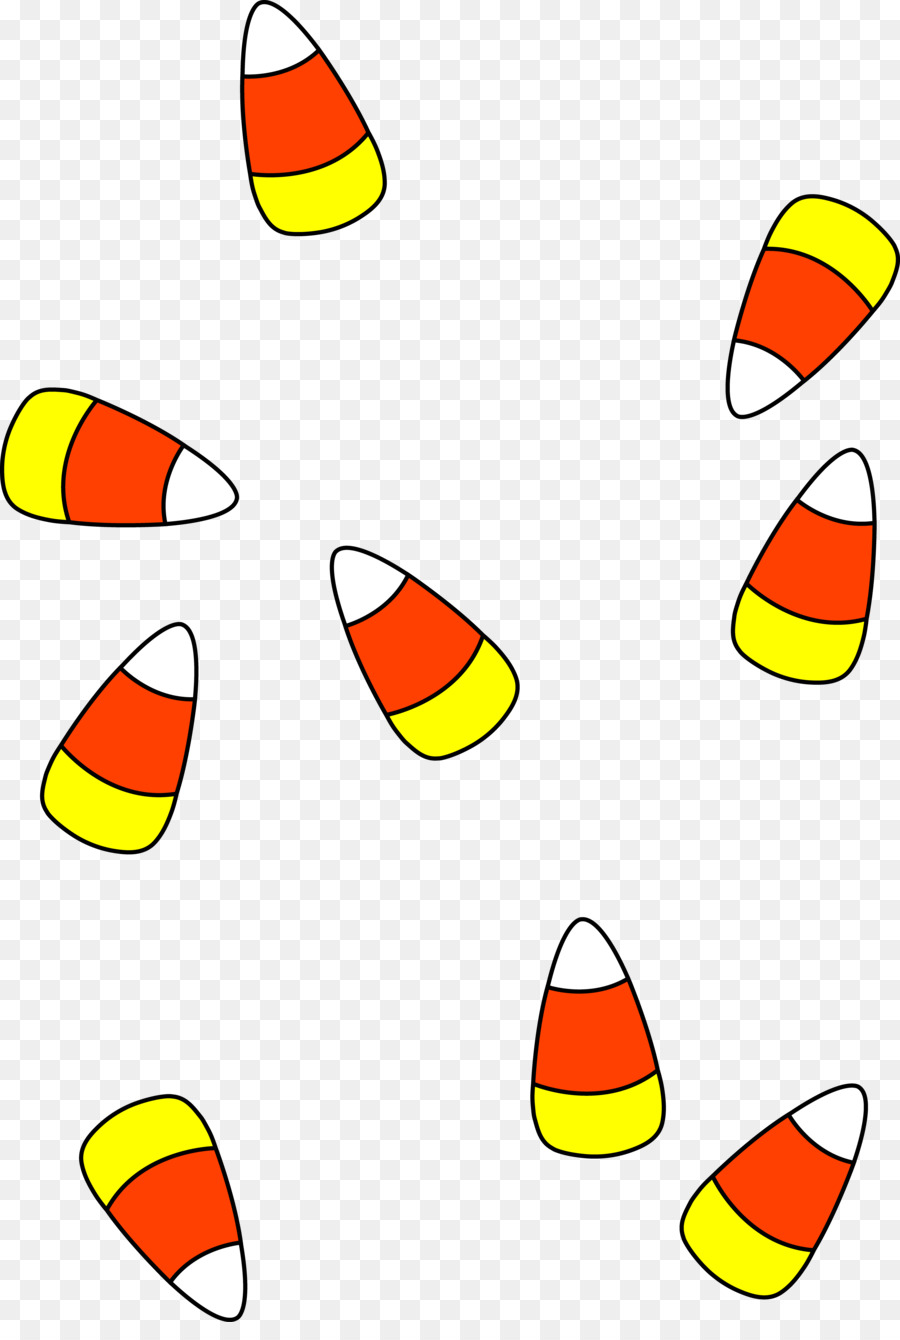 Candy corn Halloween Clip art - Halloween Free Images png download - 4510*6627 - Free Transparent Candy Corn png Download.